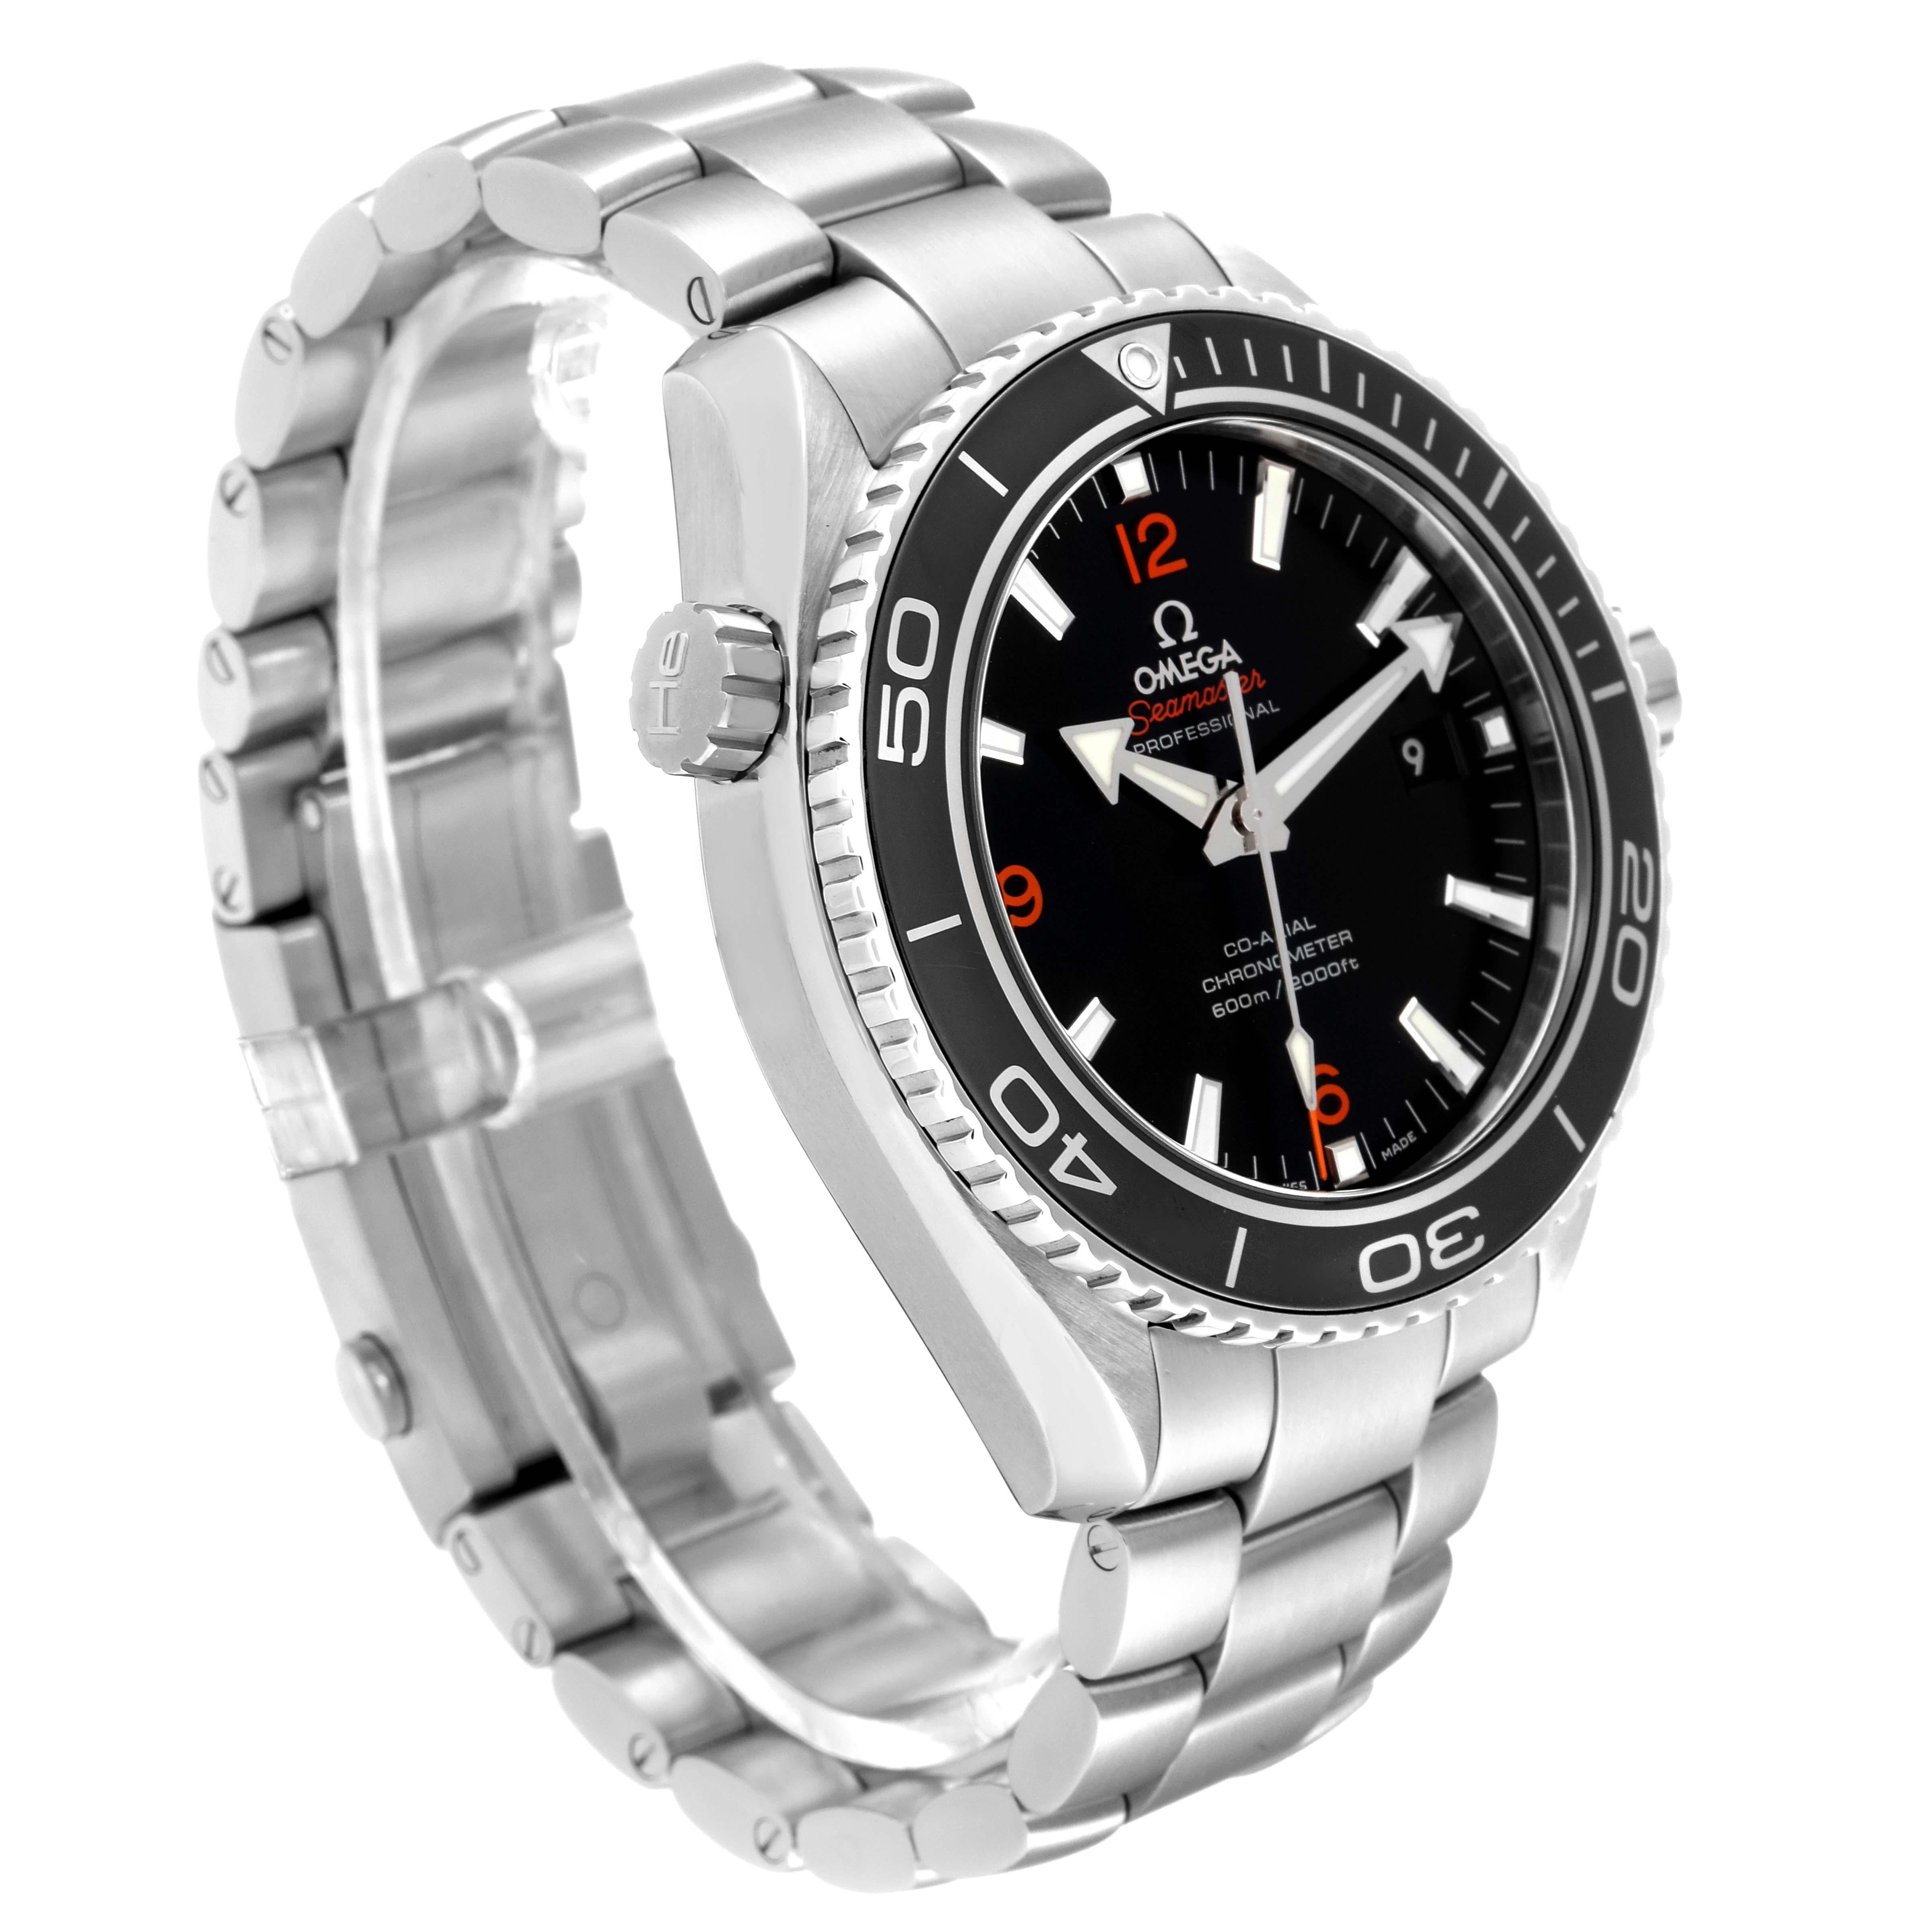 omega seamaster professional planet ocean co-axial chronometer 600m/2000ft